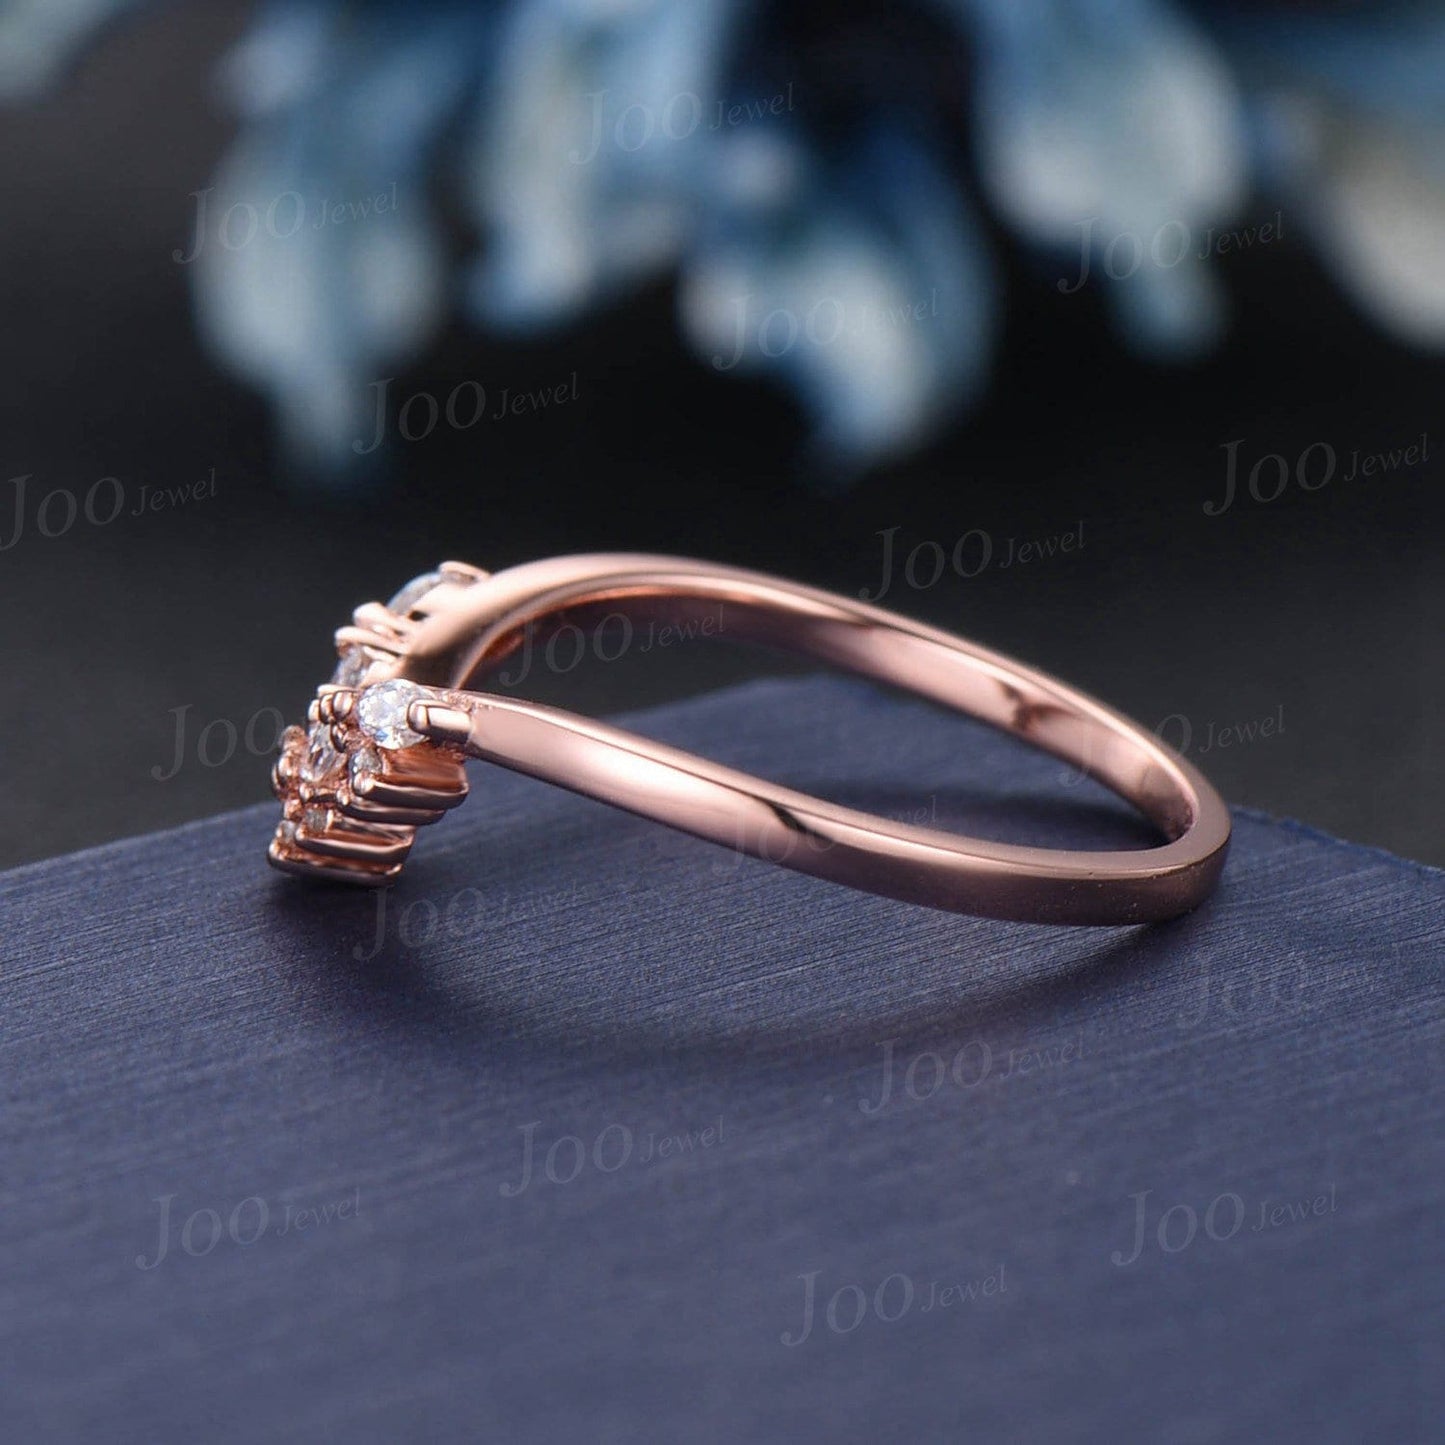 Marquise Moissanite Contour Wedding Band Rose Gold Moissanite Diamond Curved Nesting Band Unique Vintage Stacking Matching Anniversary Band